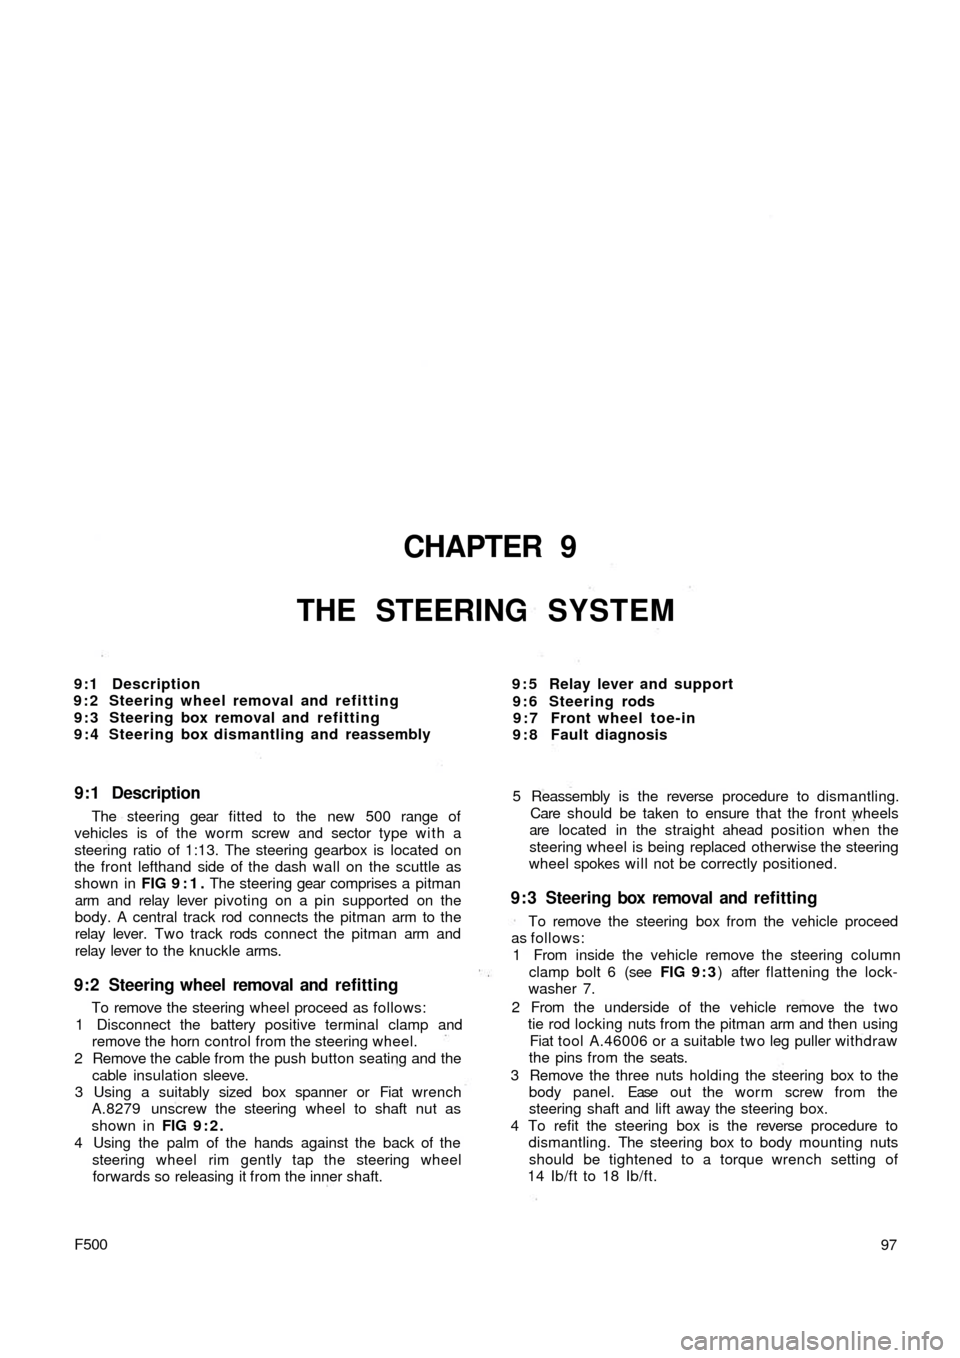 FIAT 500 1970 1.G Workshop Manual CHAPTER 9
THE STEERING SYSTEM
9 : 5 Relay lever and support
9 : 6 Steering rods
9 : 7 Front wheel toe-in
9 : 8 Fault diagnosis 9:1 Description
9 : 2 Steering wheel removal and refitting
9 : 3 Steering